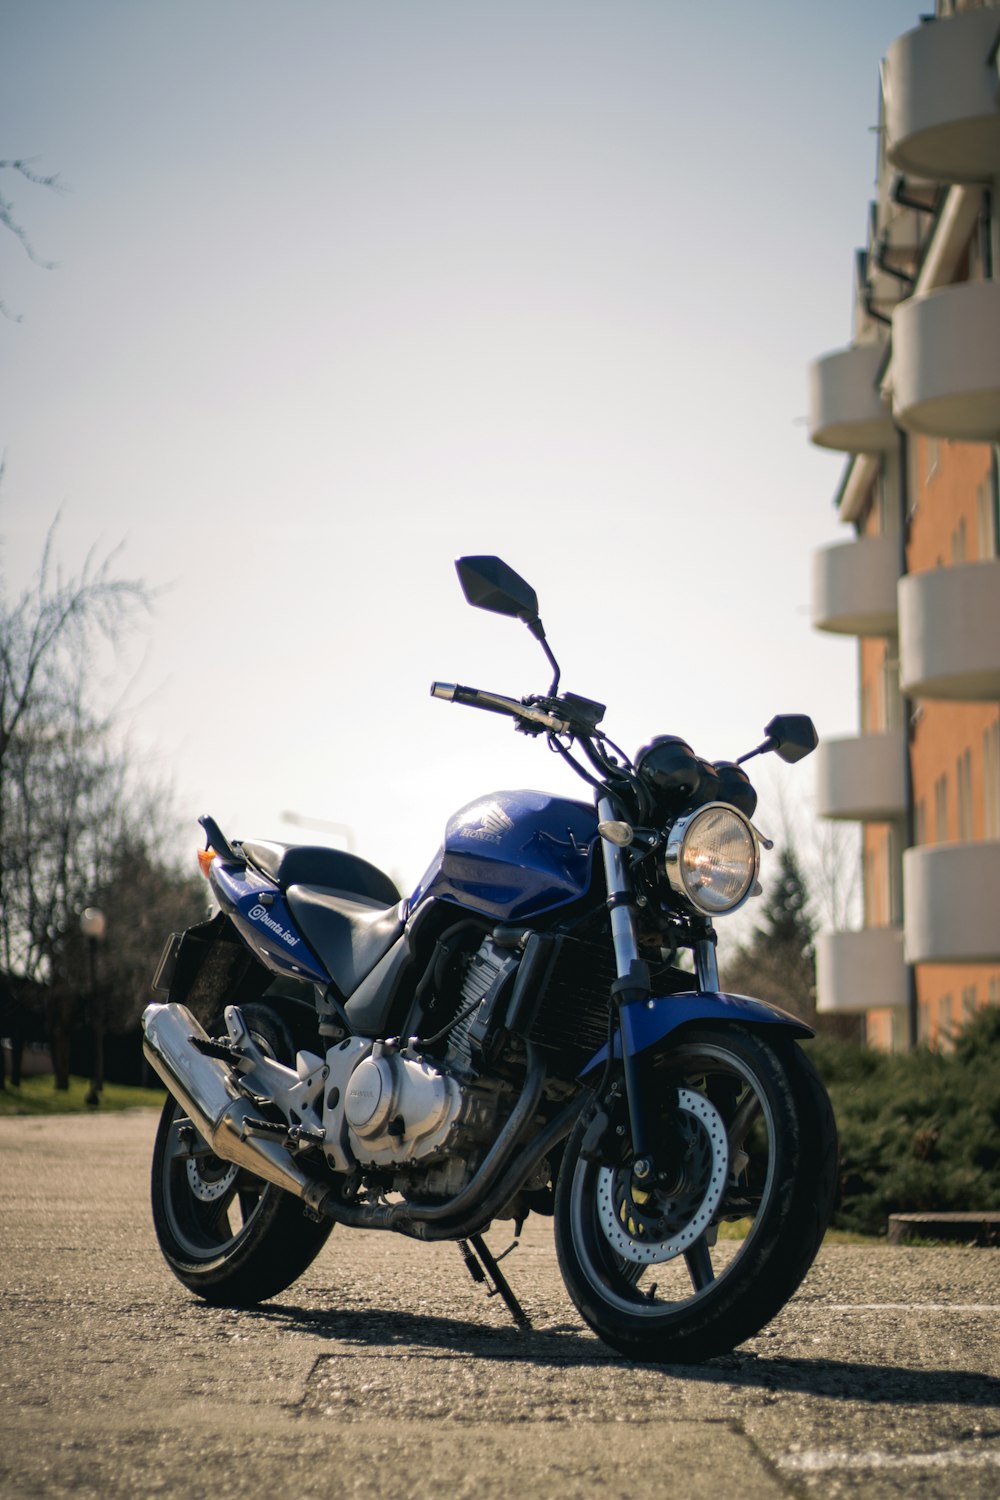 a blue motorcycle parked in front of a building